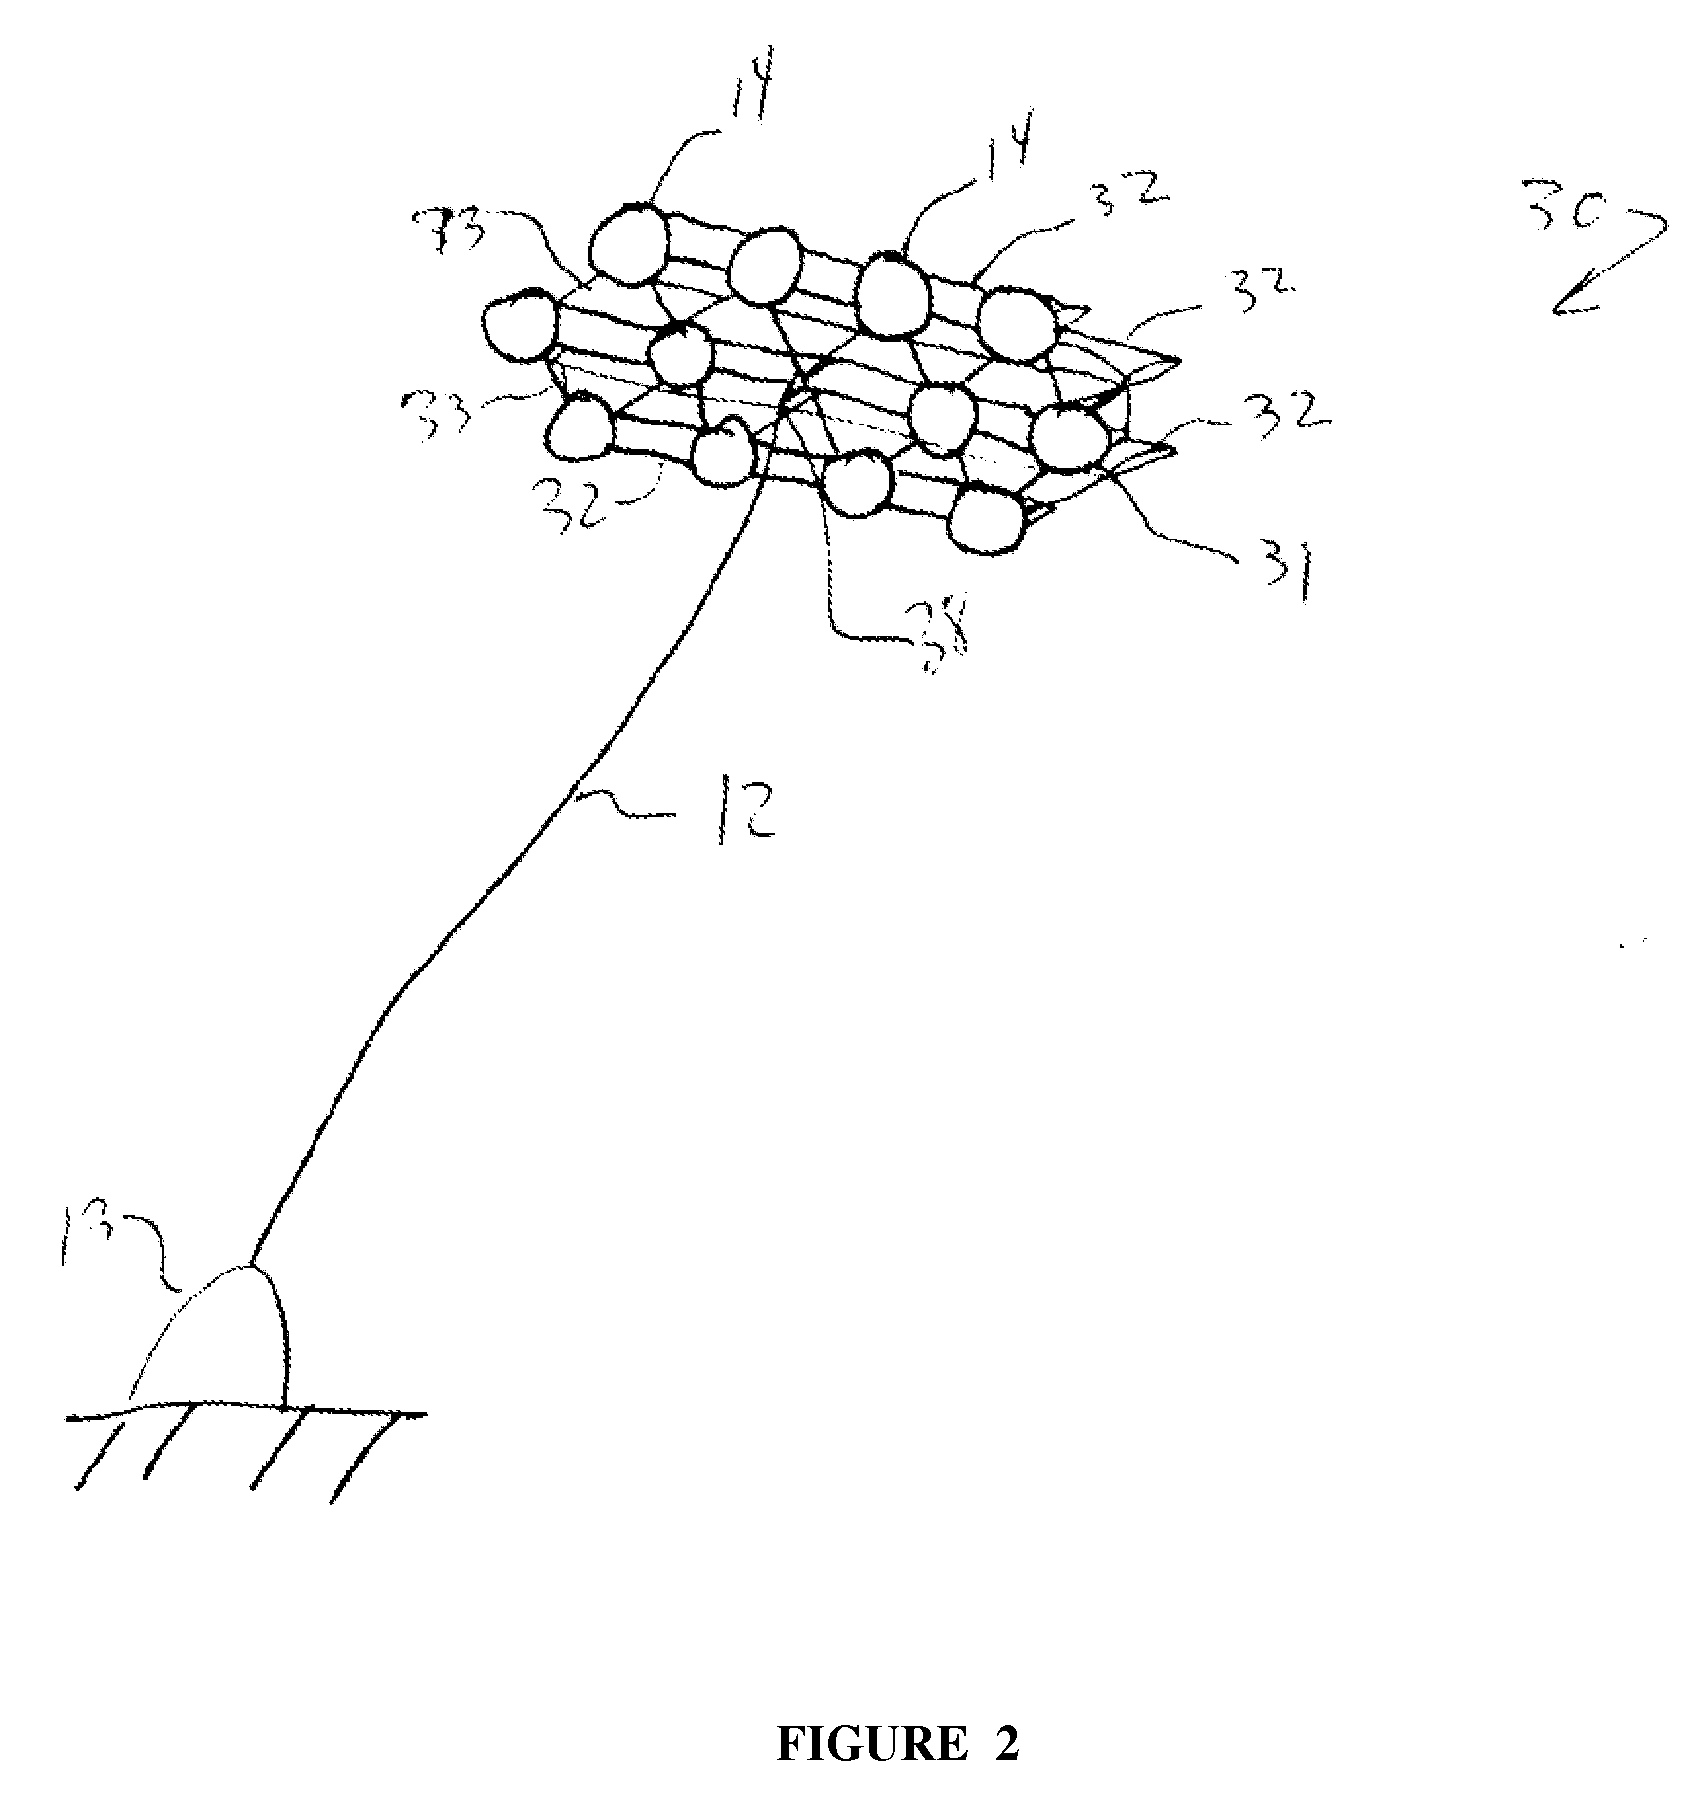 Method for Generating Electrical Power Using a Tethered Airborne Power Generation System